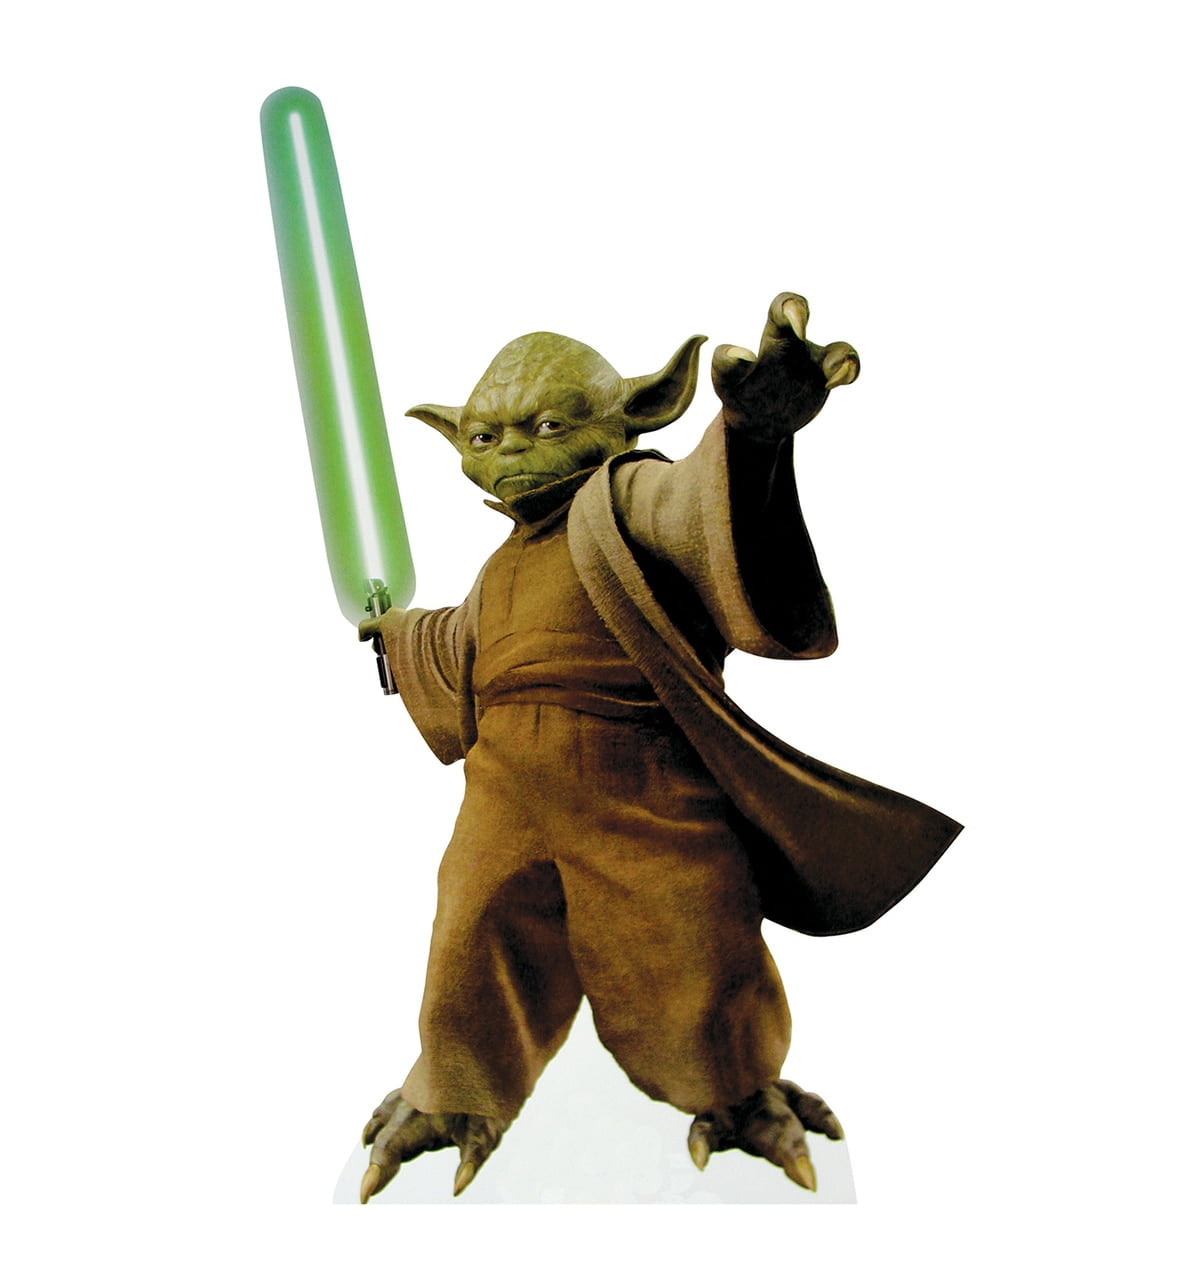 Star Wars Collector Yoda Statue Character Removable Lightsaber Life Size Model 